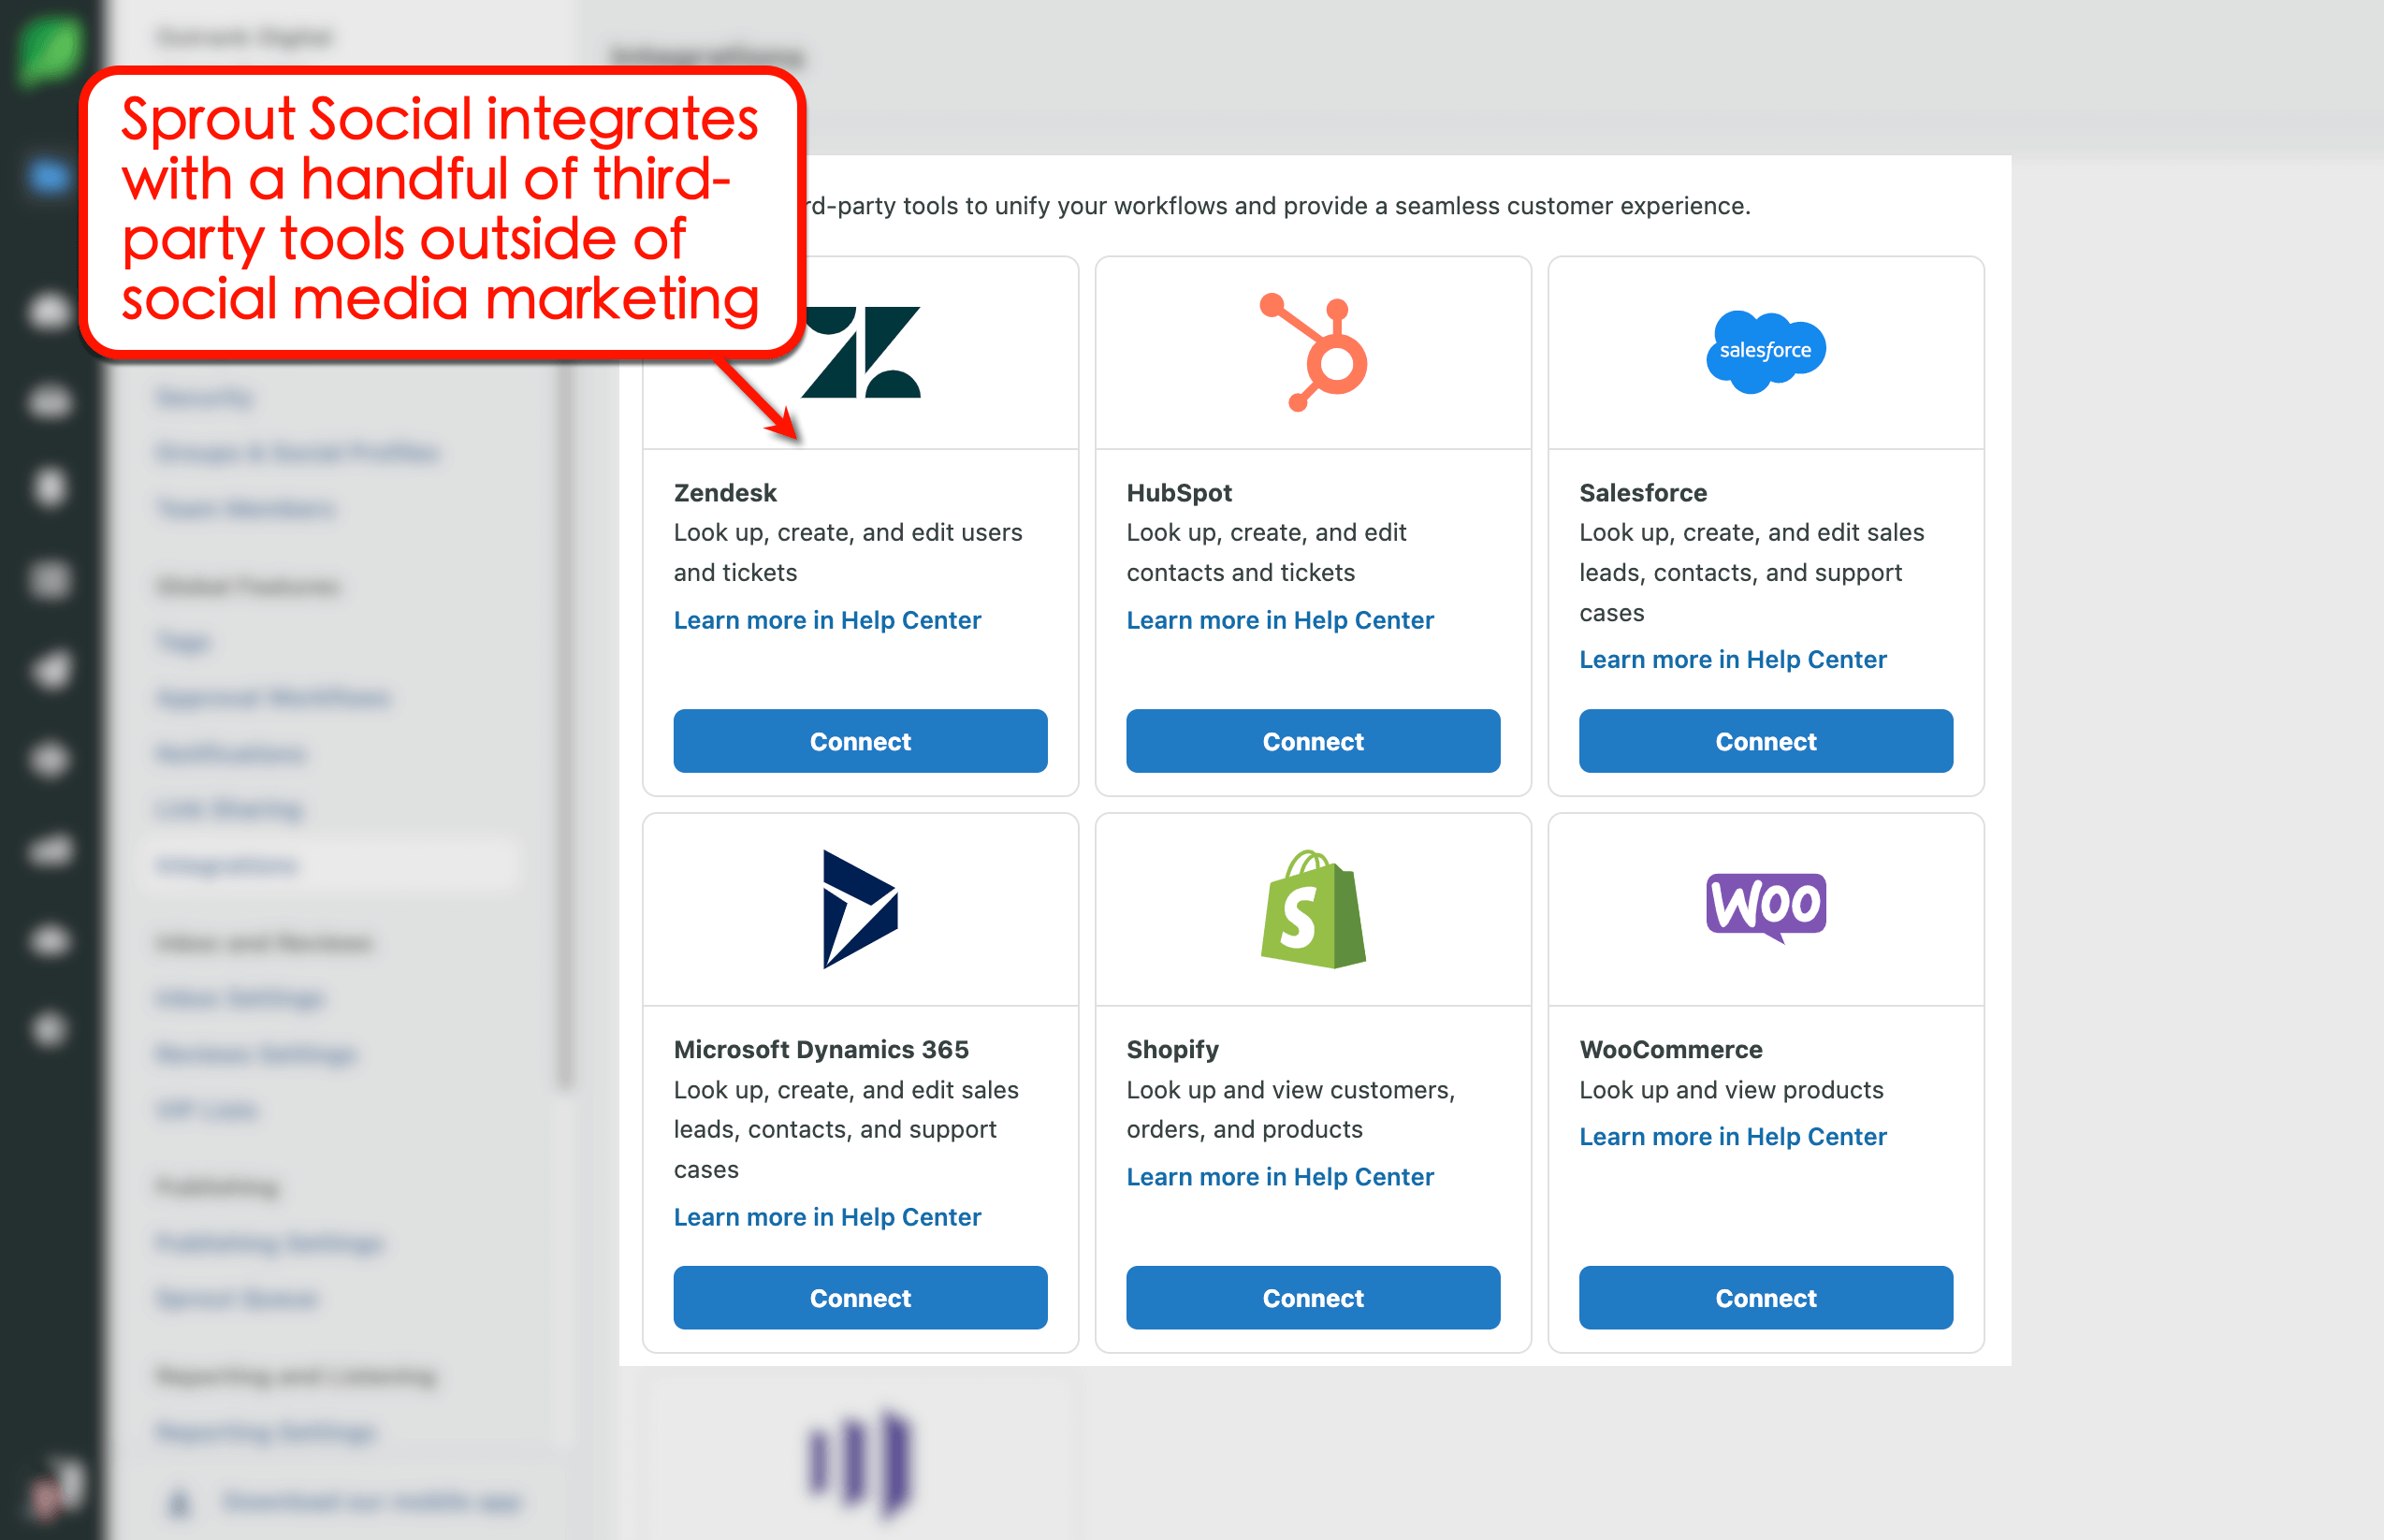 SproutSocial's integration